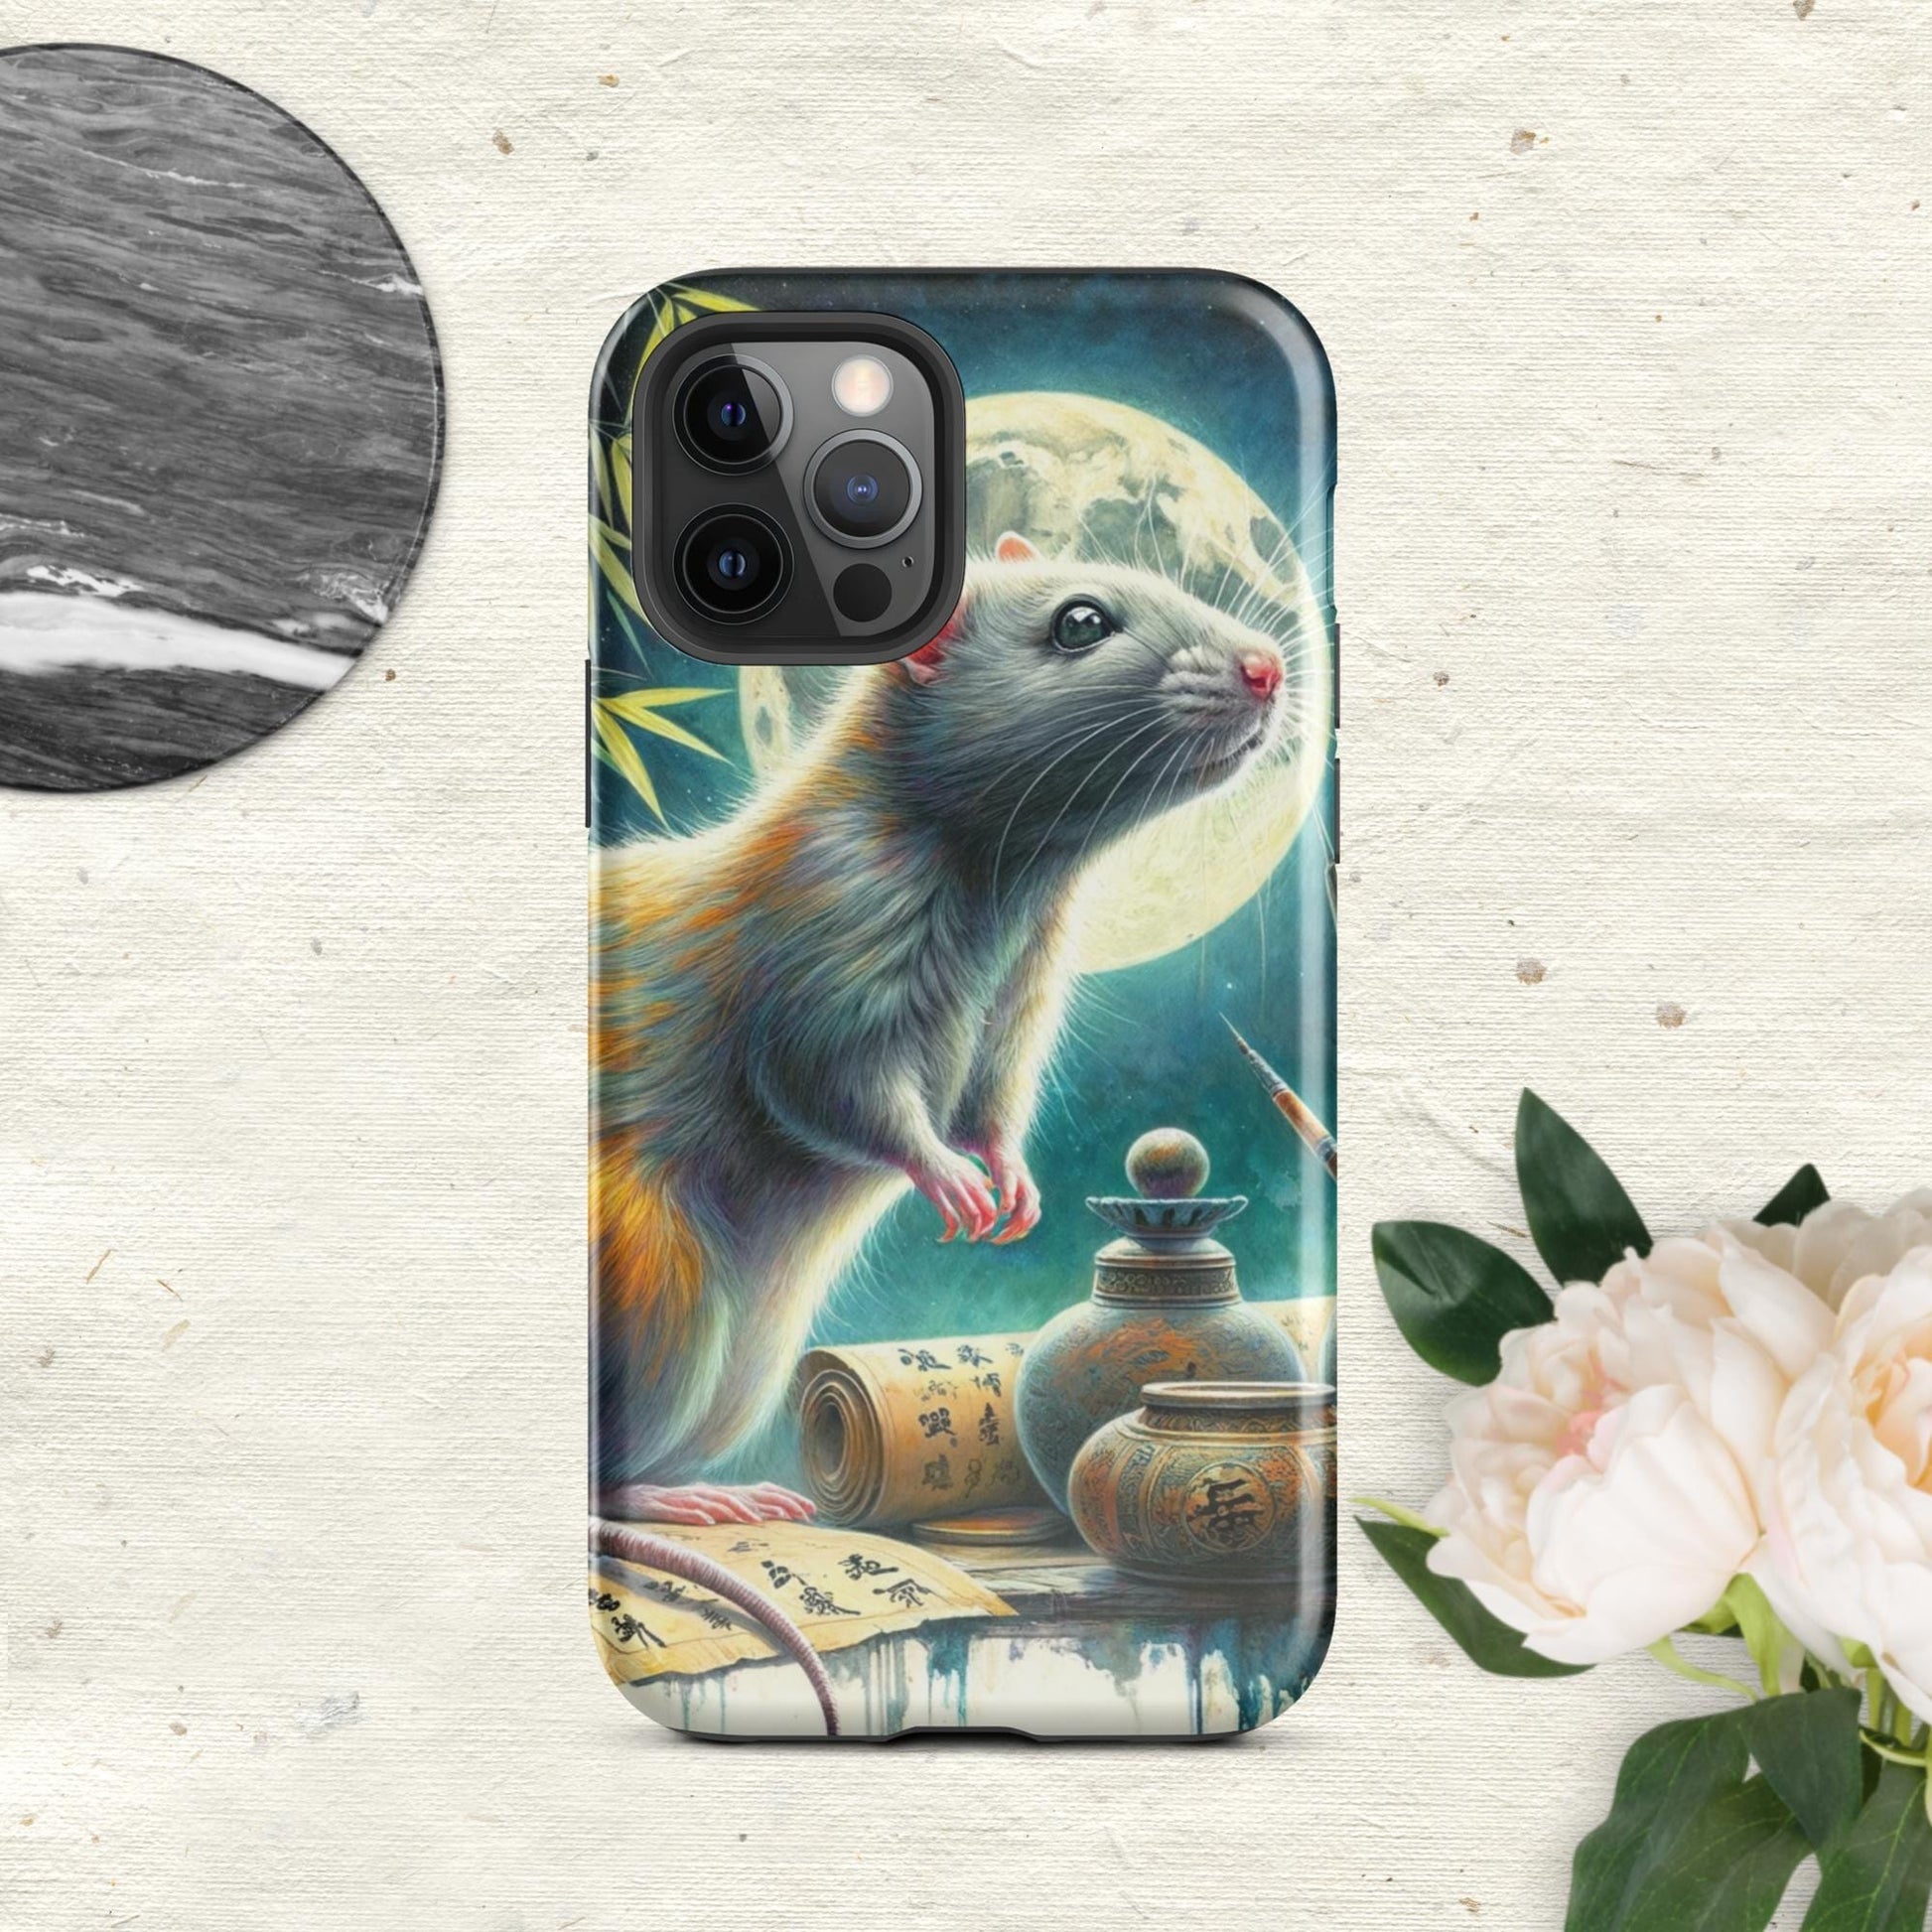 The Hologram Hook Up Glossy / iPhone 12 Pro Rat Tough Case for iPhone®